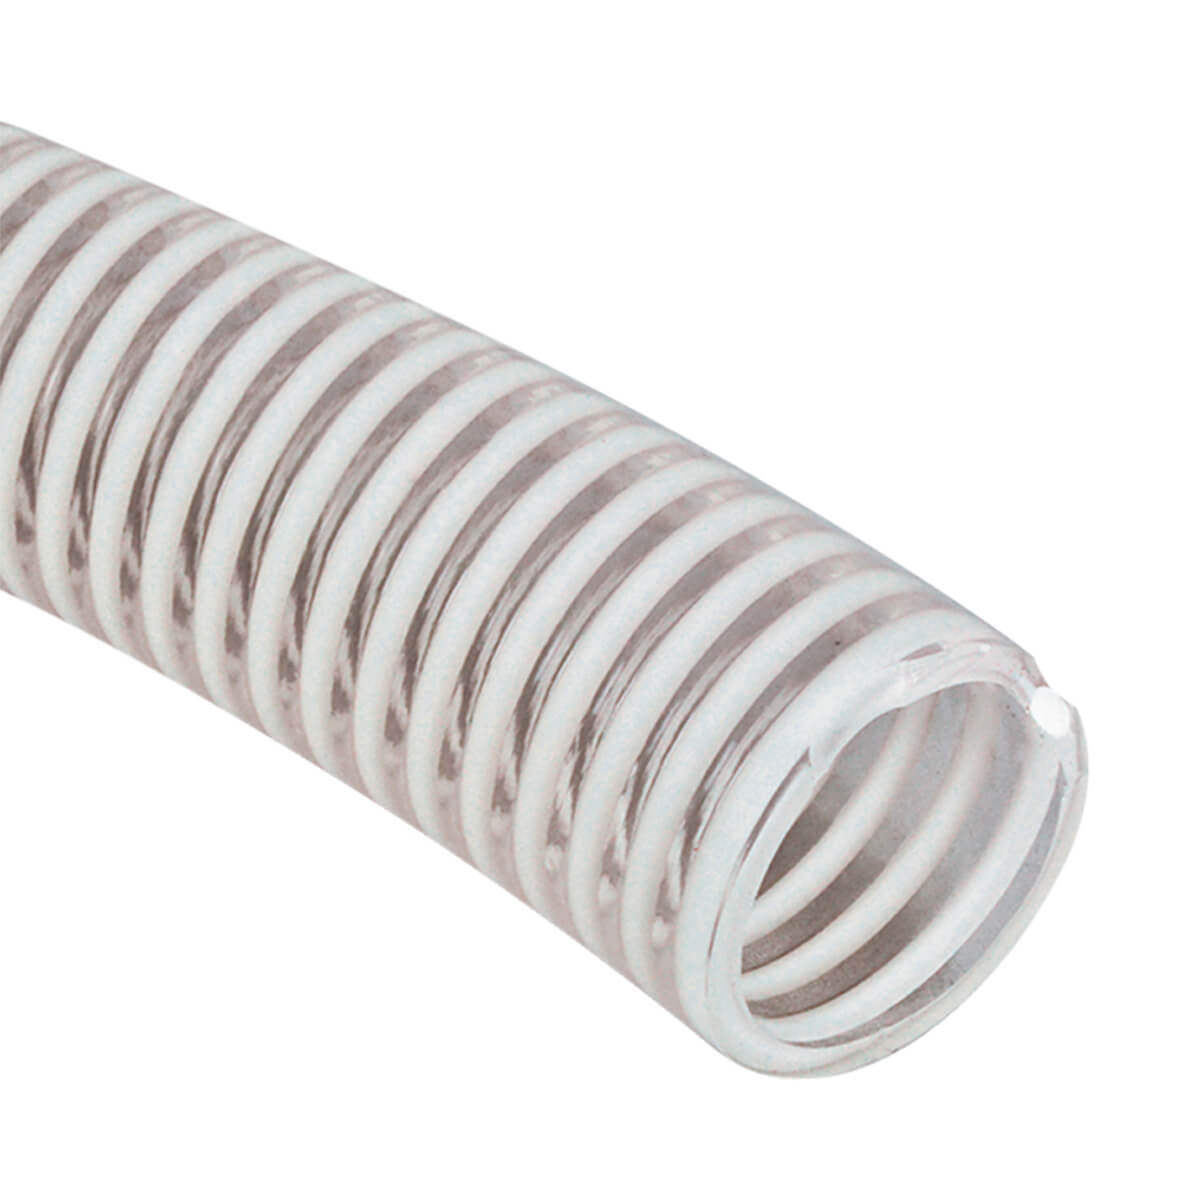 Clear PVC Suction Hose — Bulk/Uncoupled - 2-in - Price Per ft